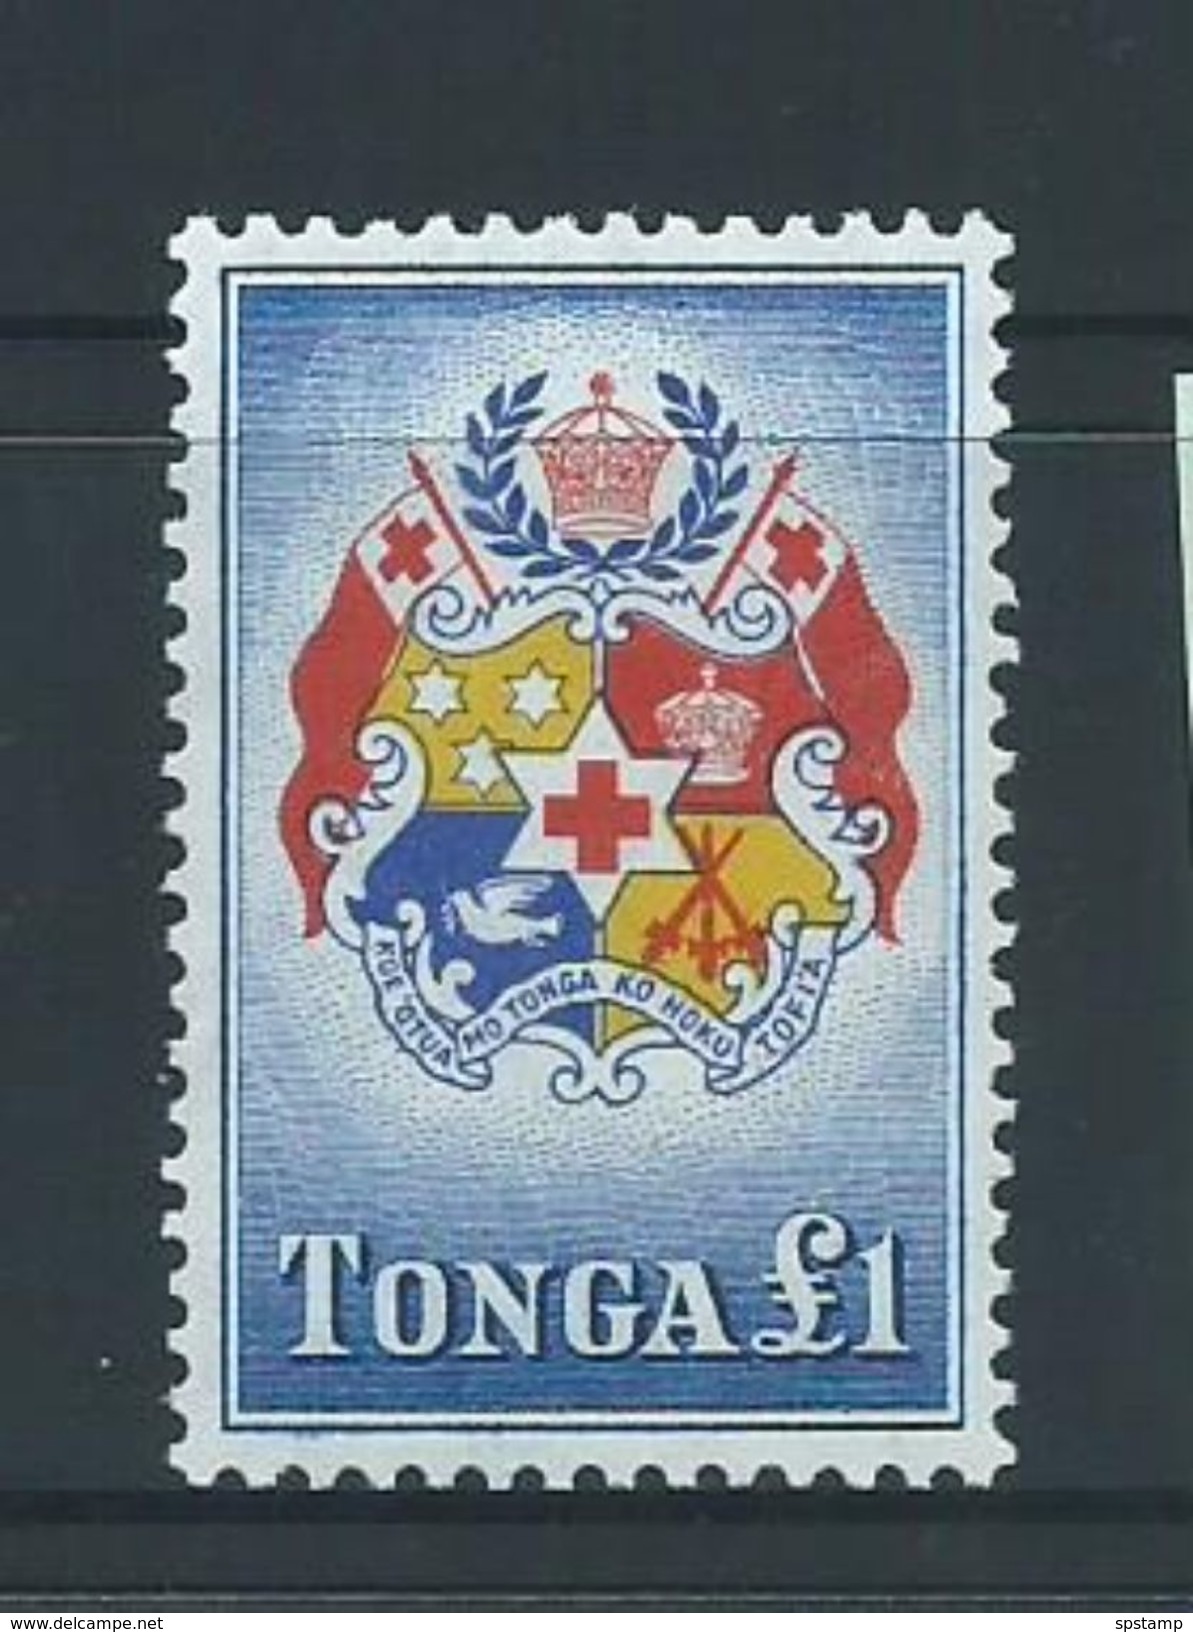 Tonga 1953 1 Pound Coat Of Arms Definitive MNH Some Natural Vertical Gum Roll - Tonga (...-1970)